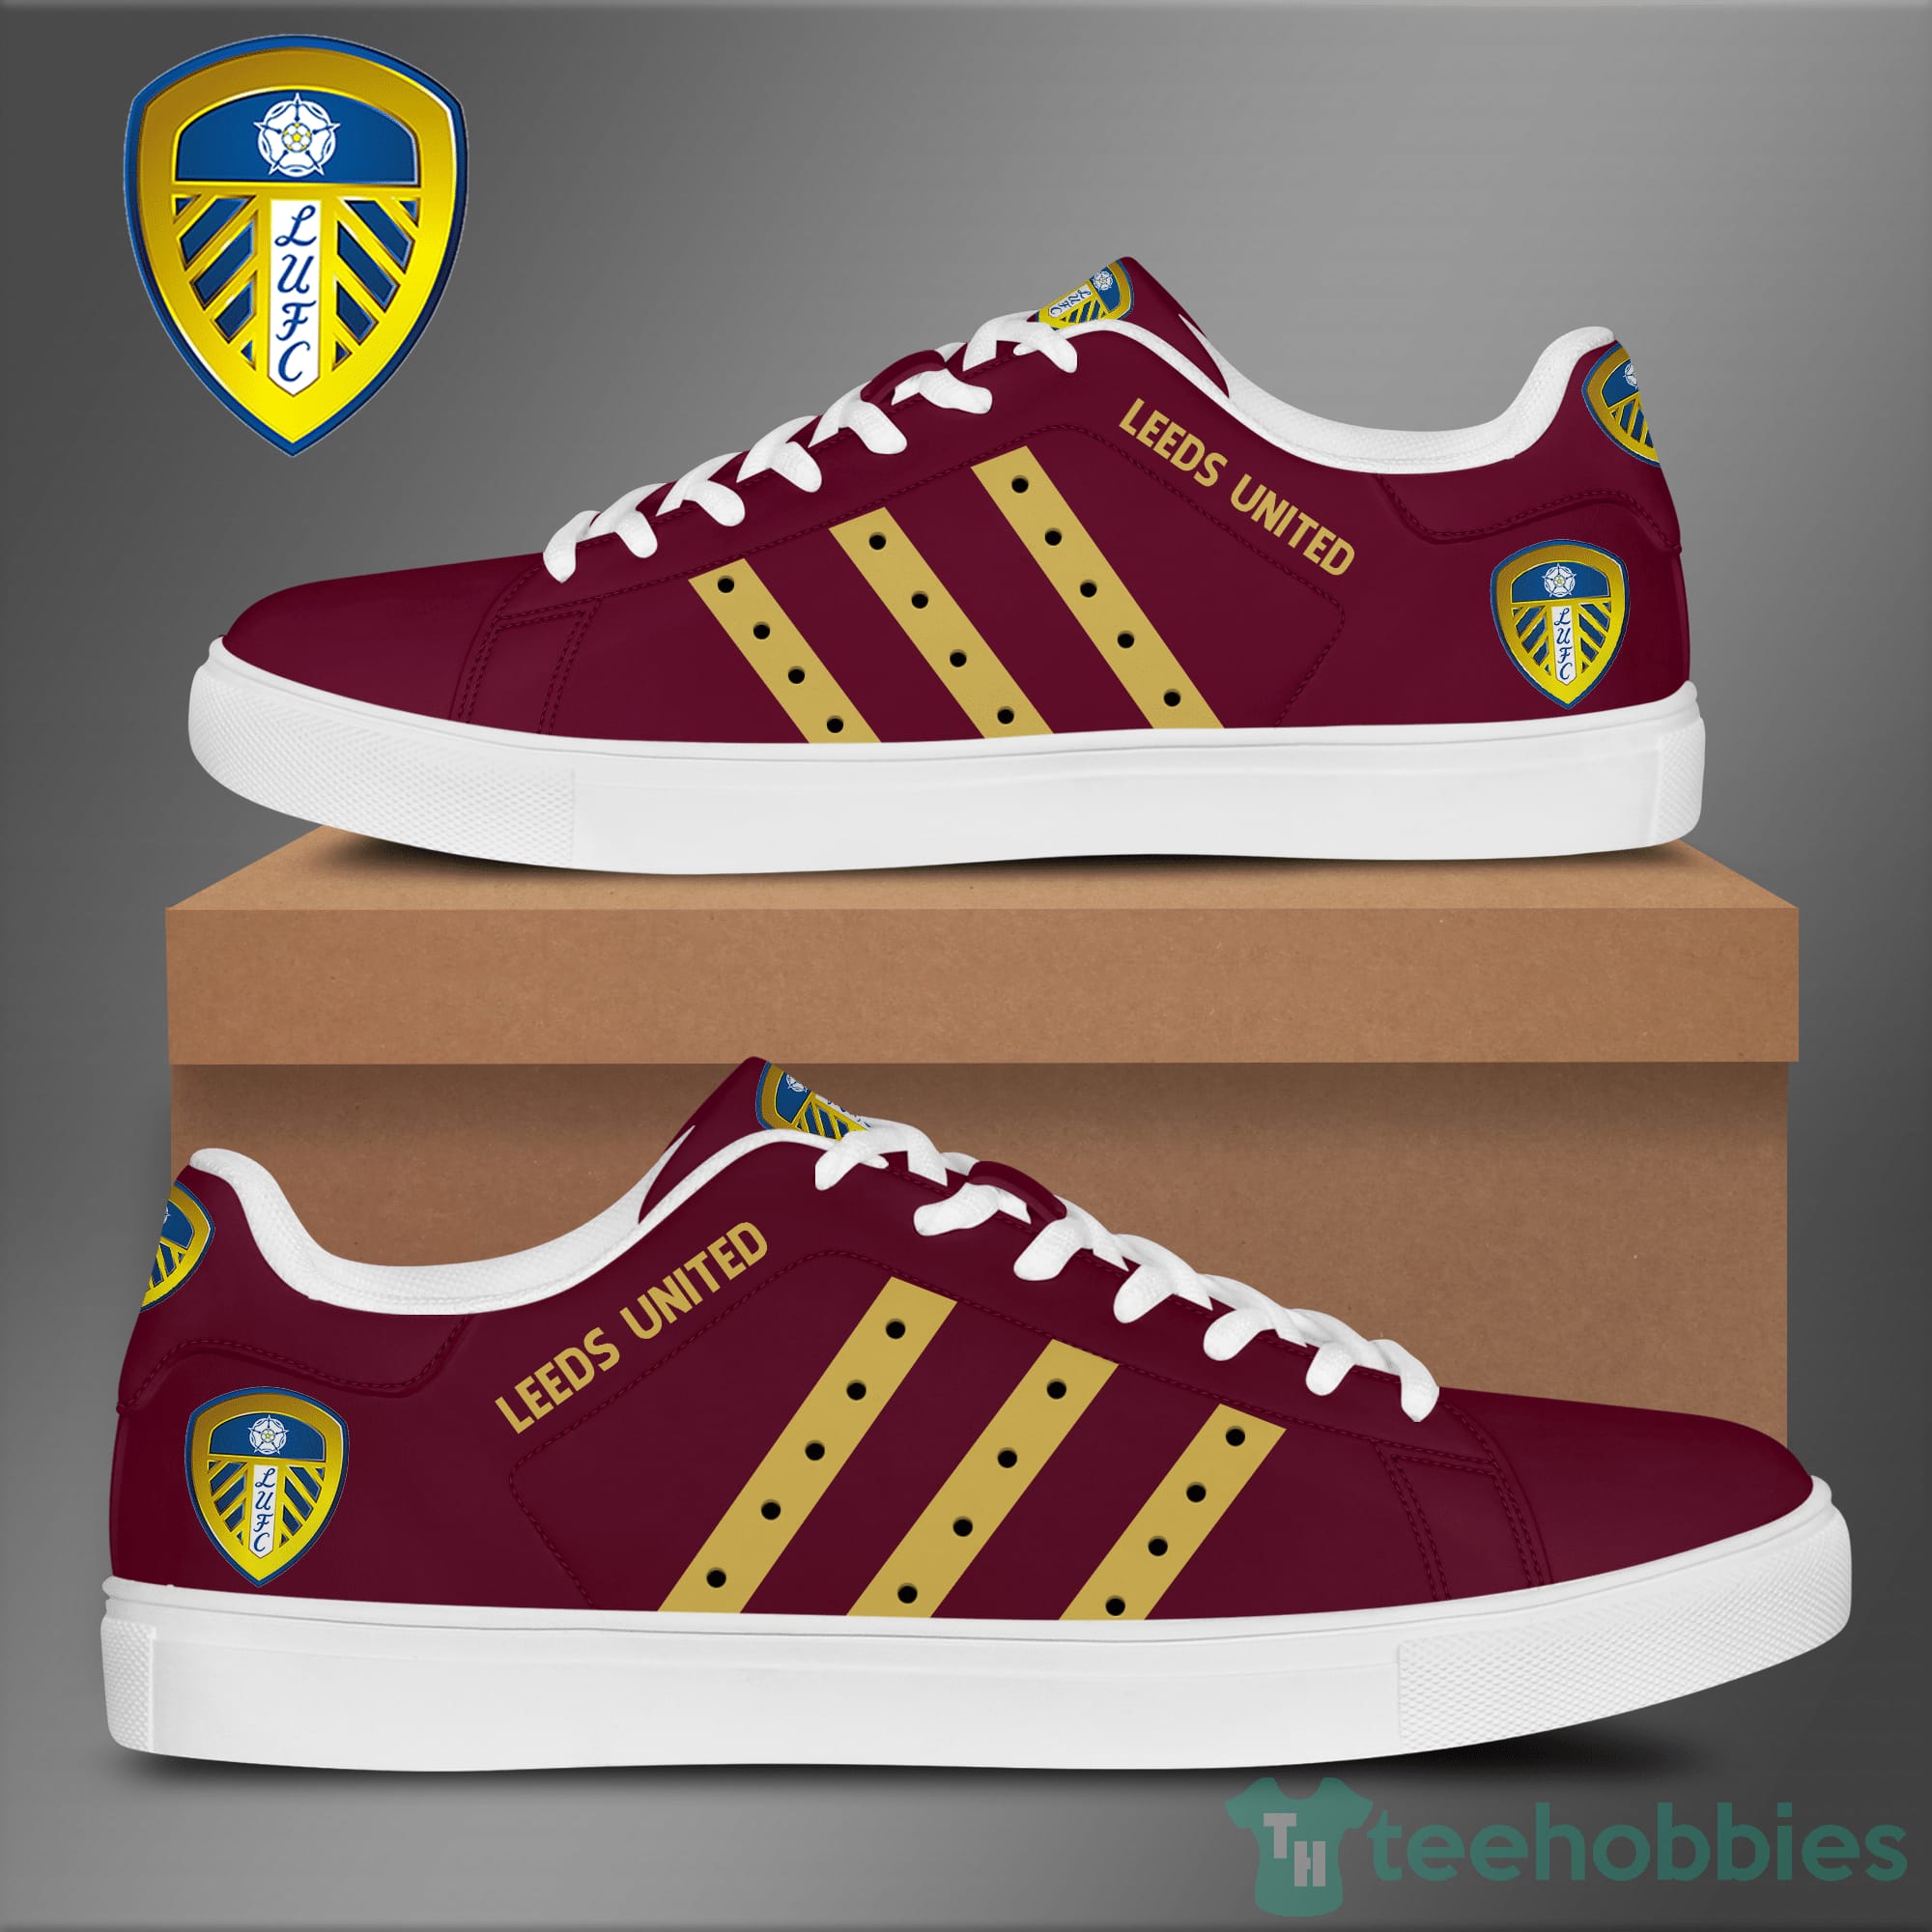 Leeds United F.C Cardinal Red Low Top Skate Shoes Product photo 1